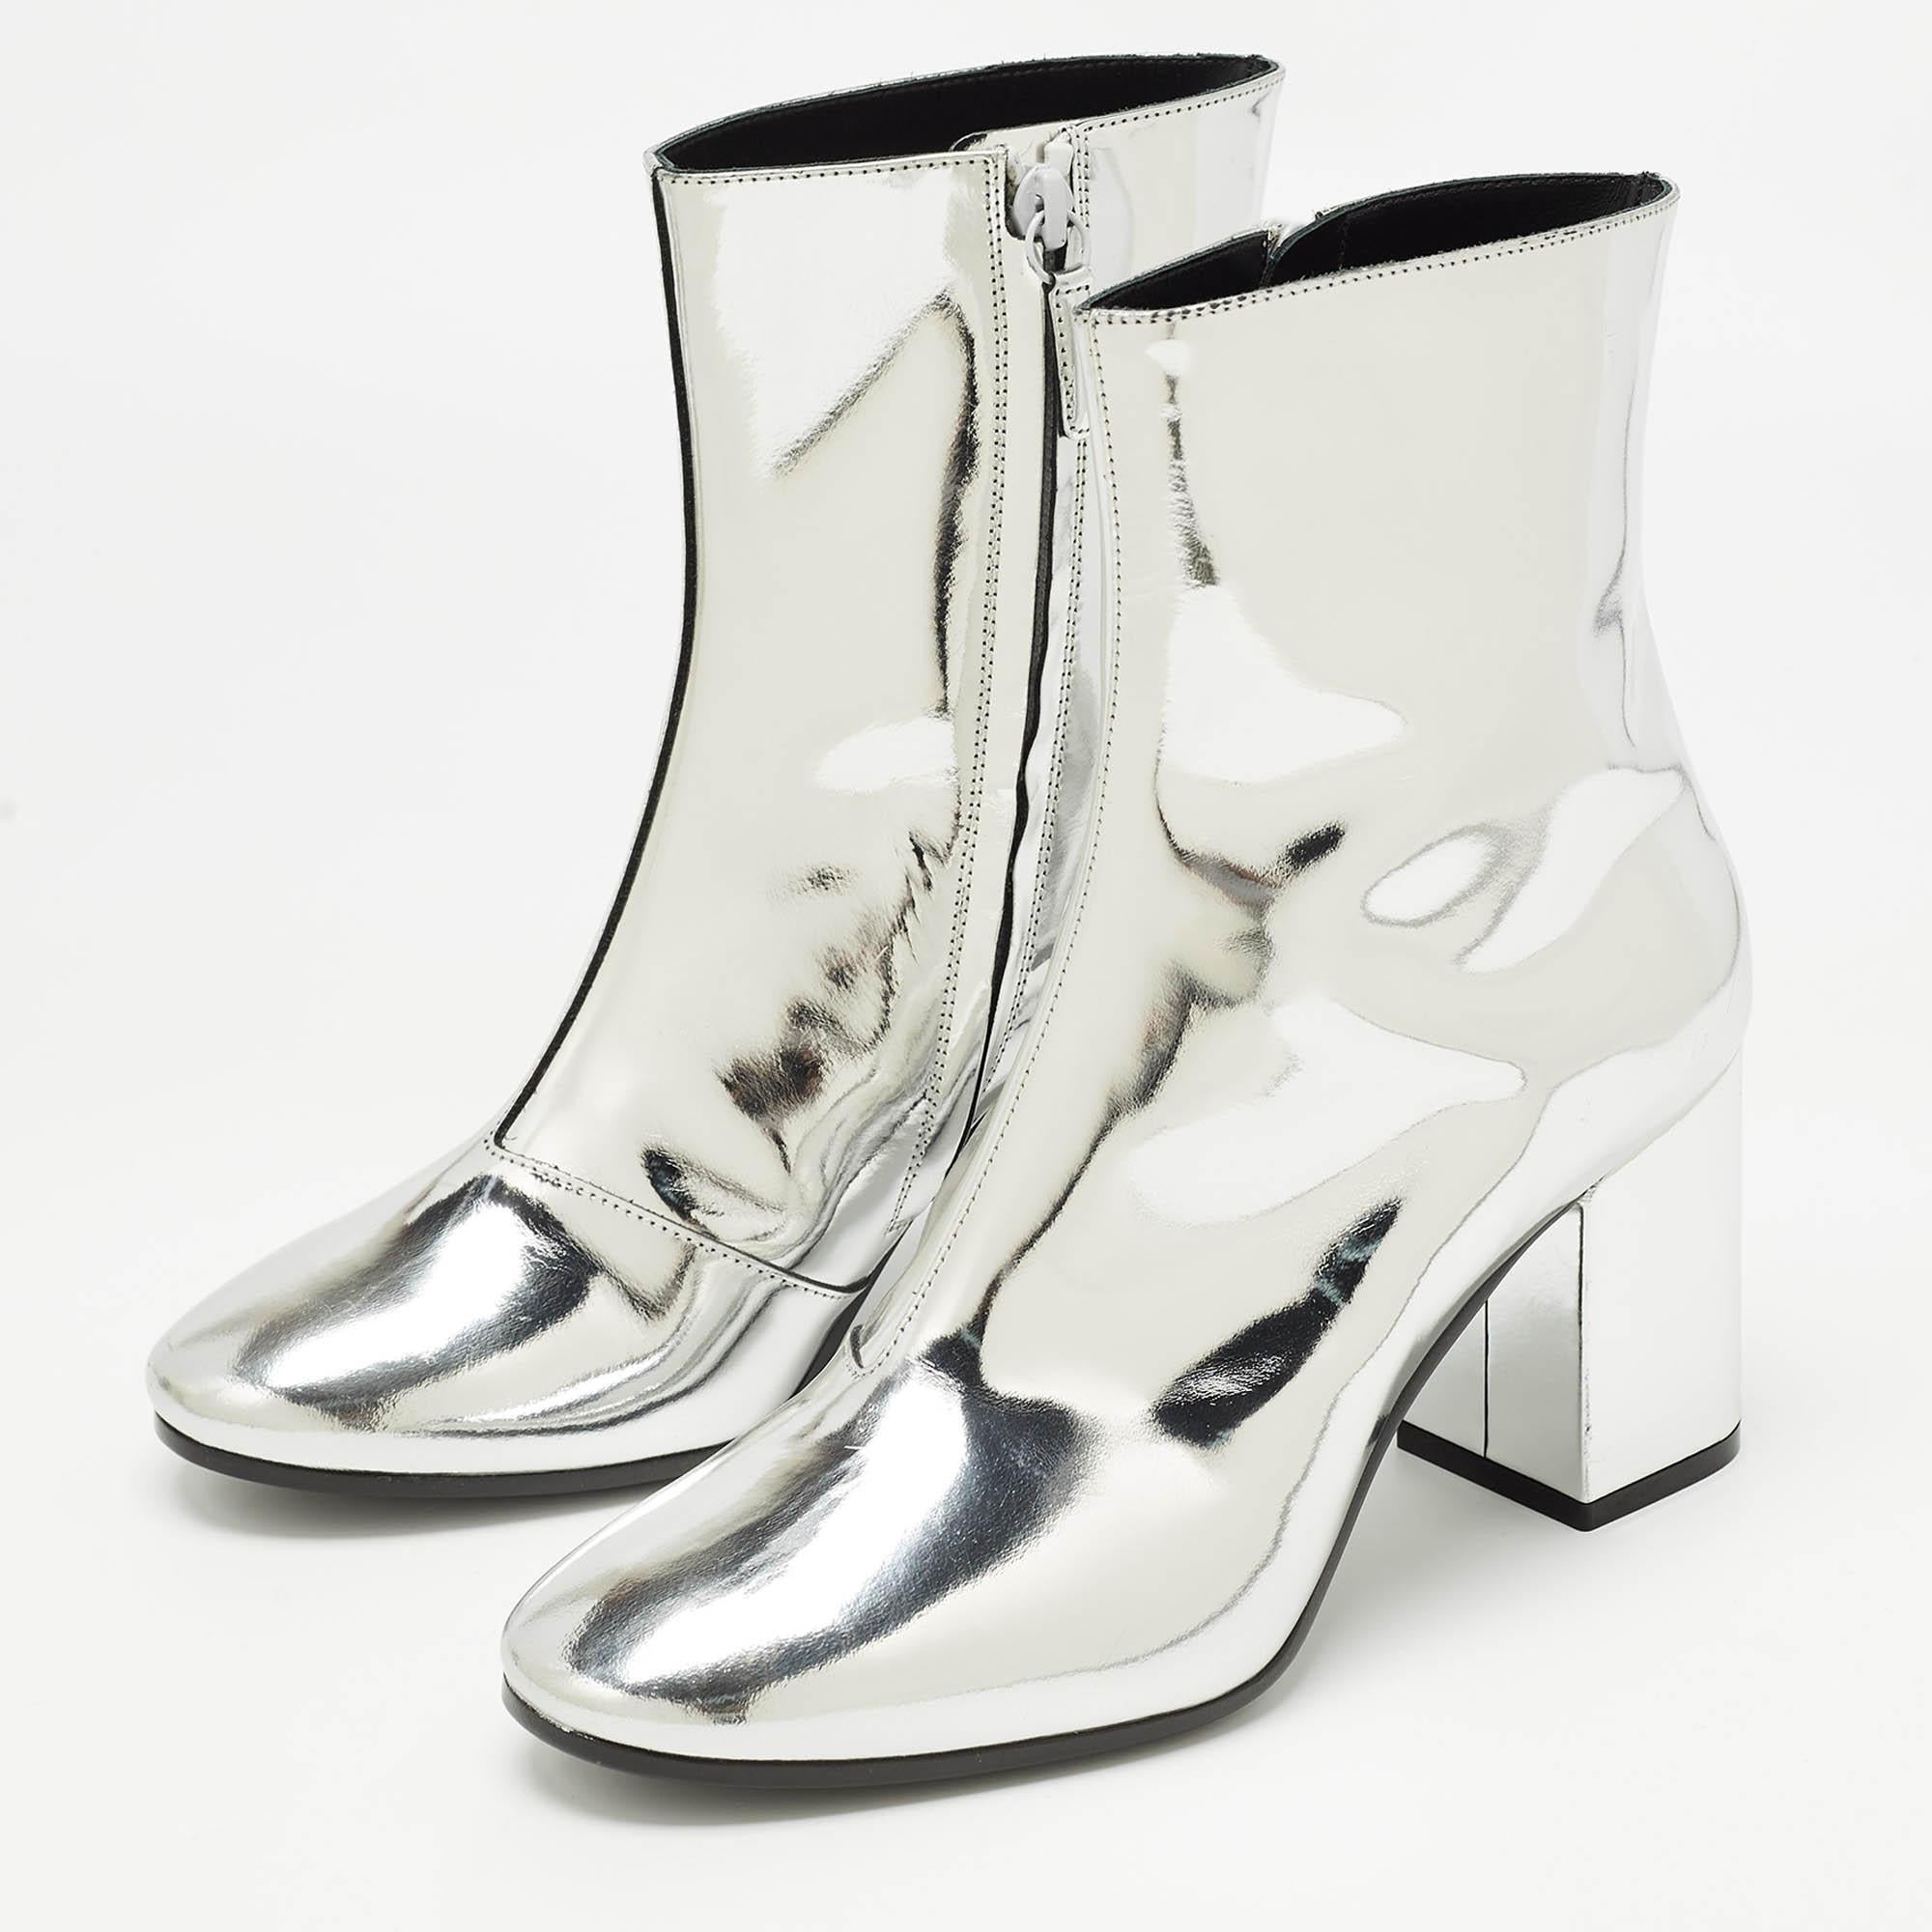 Balenciaga Silver Patent Leather Zip Ankle Boots Size 36 For Sale 4